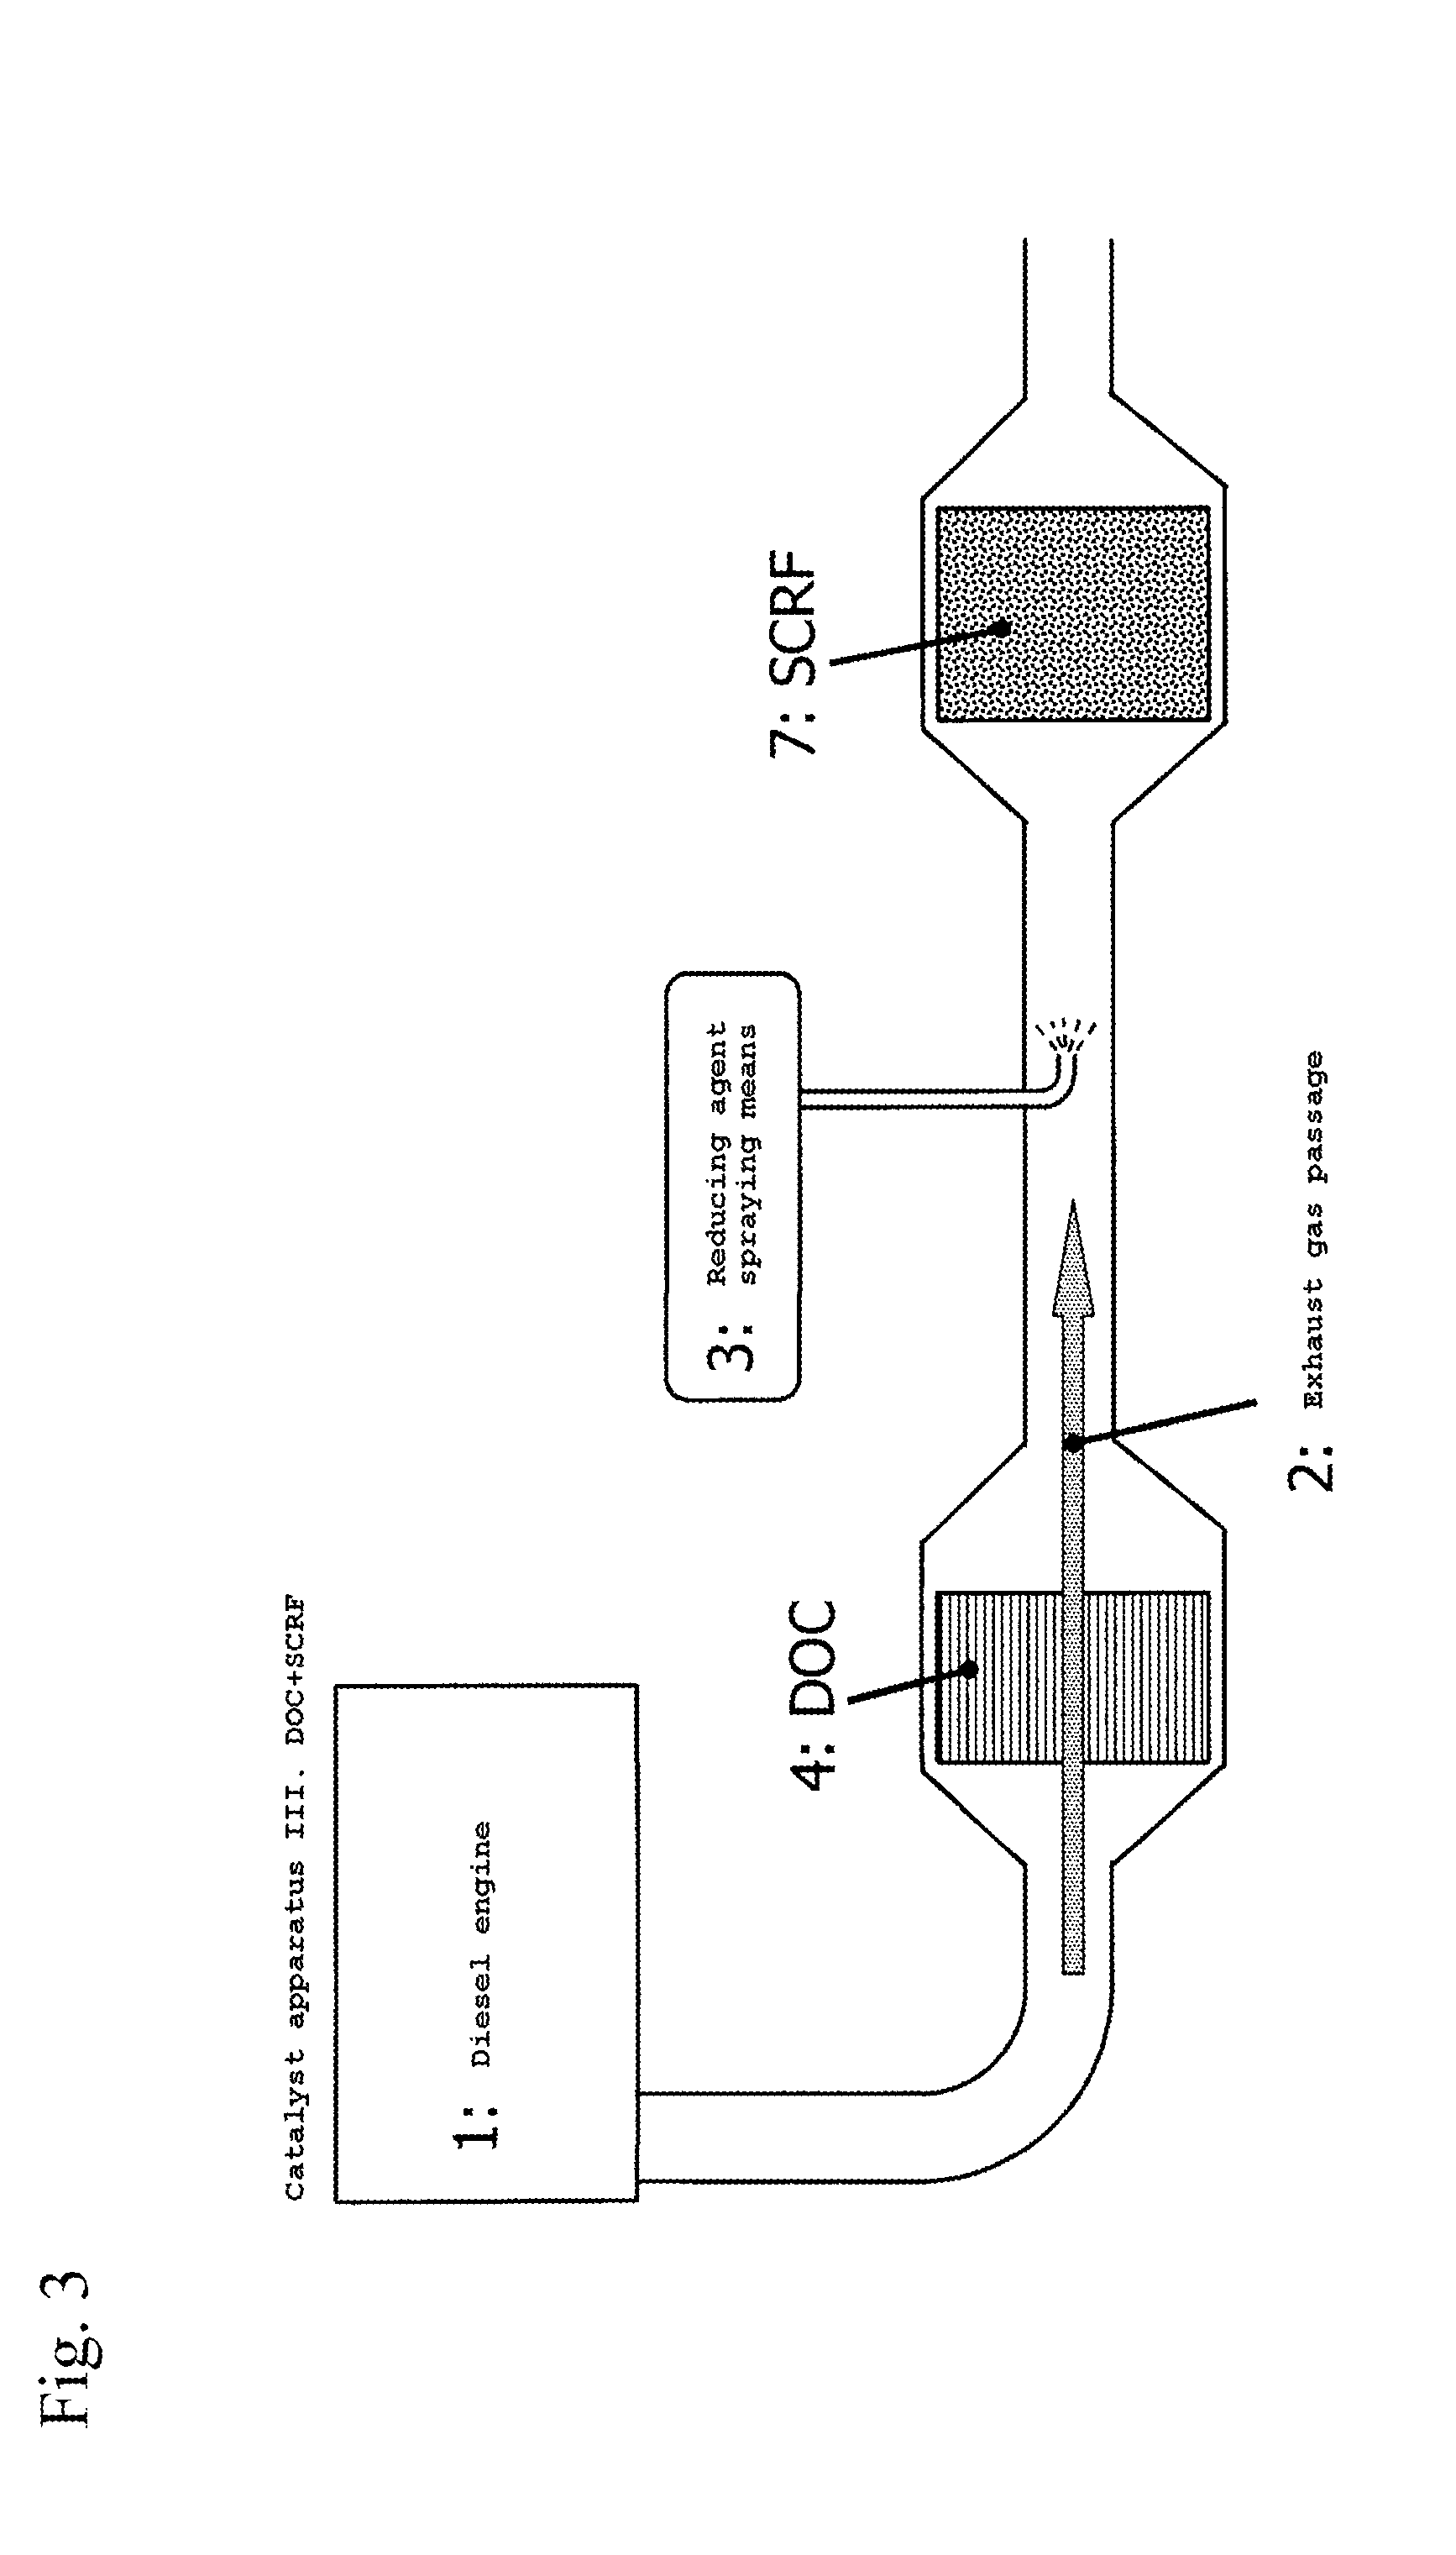 Off gas purification device